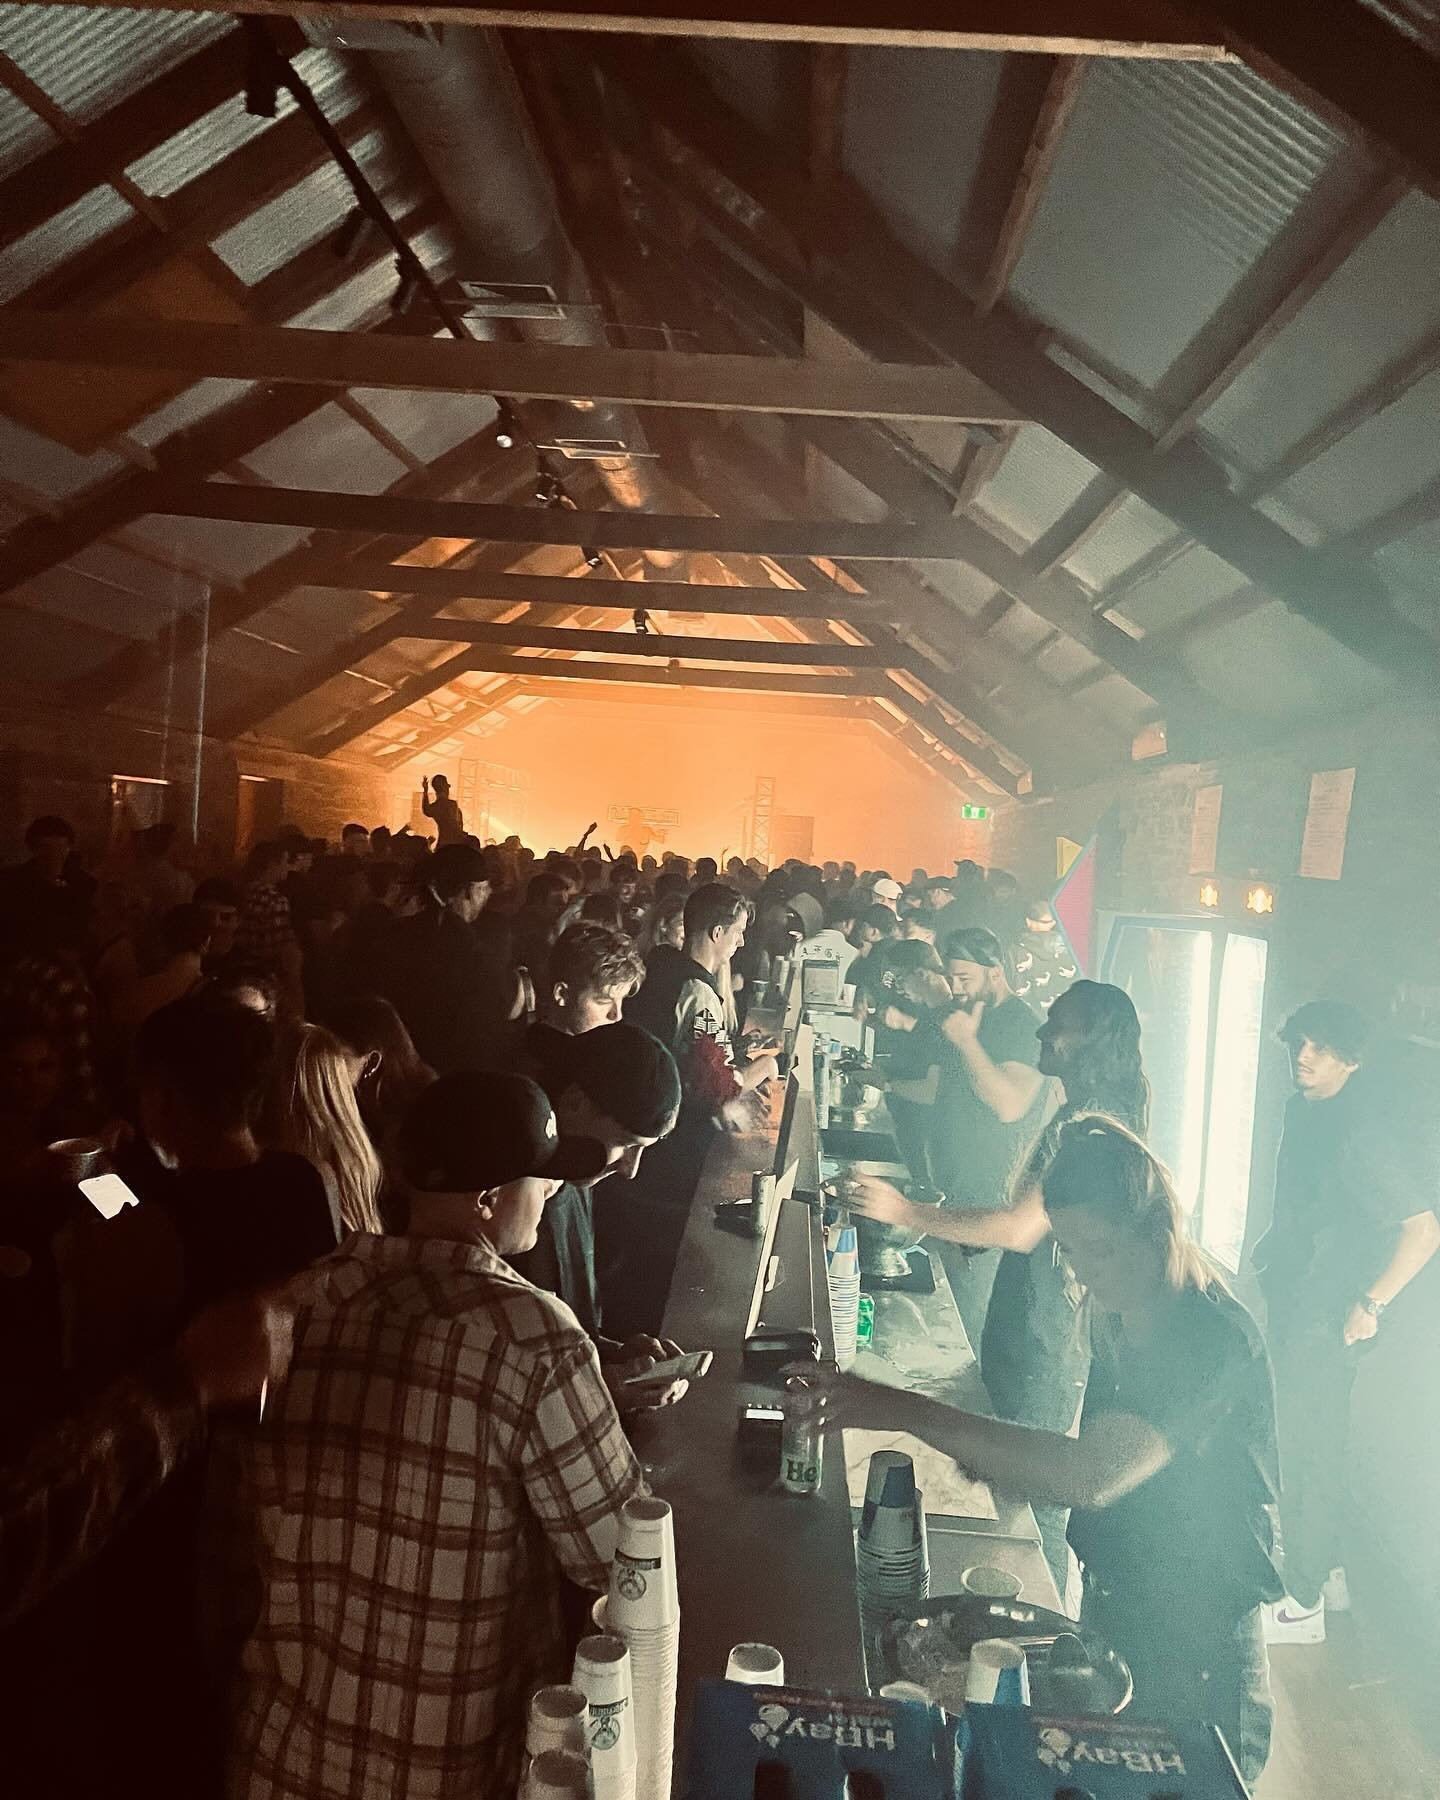 As well as making cocktails and bringing the bar to your private events, we can also provide bar staff, bar managers, licensing, cash bars, stock management and absolute good times for your larger events like this one we helped out for @coastal_promo